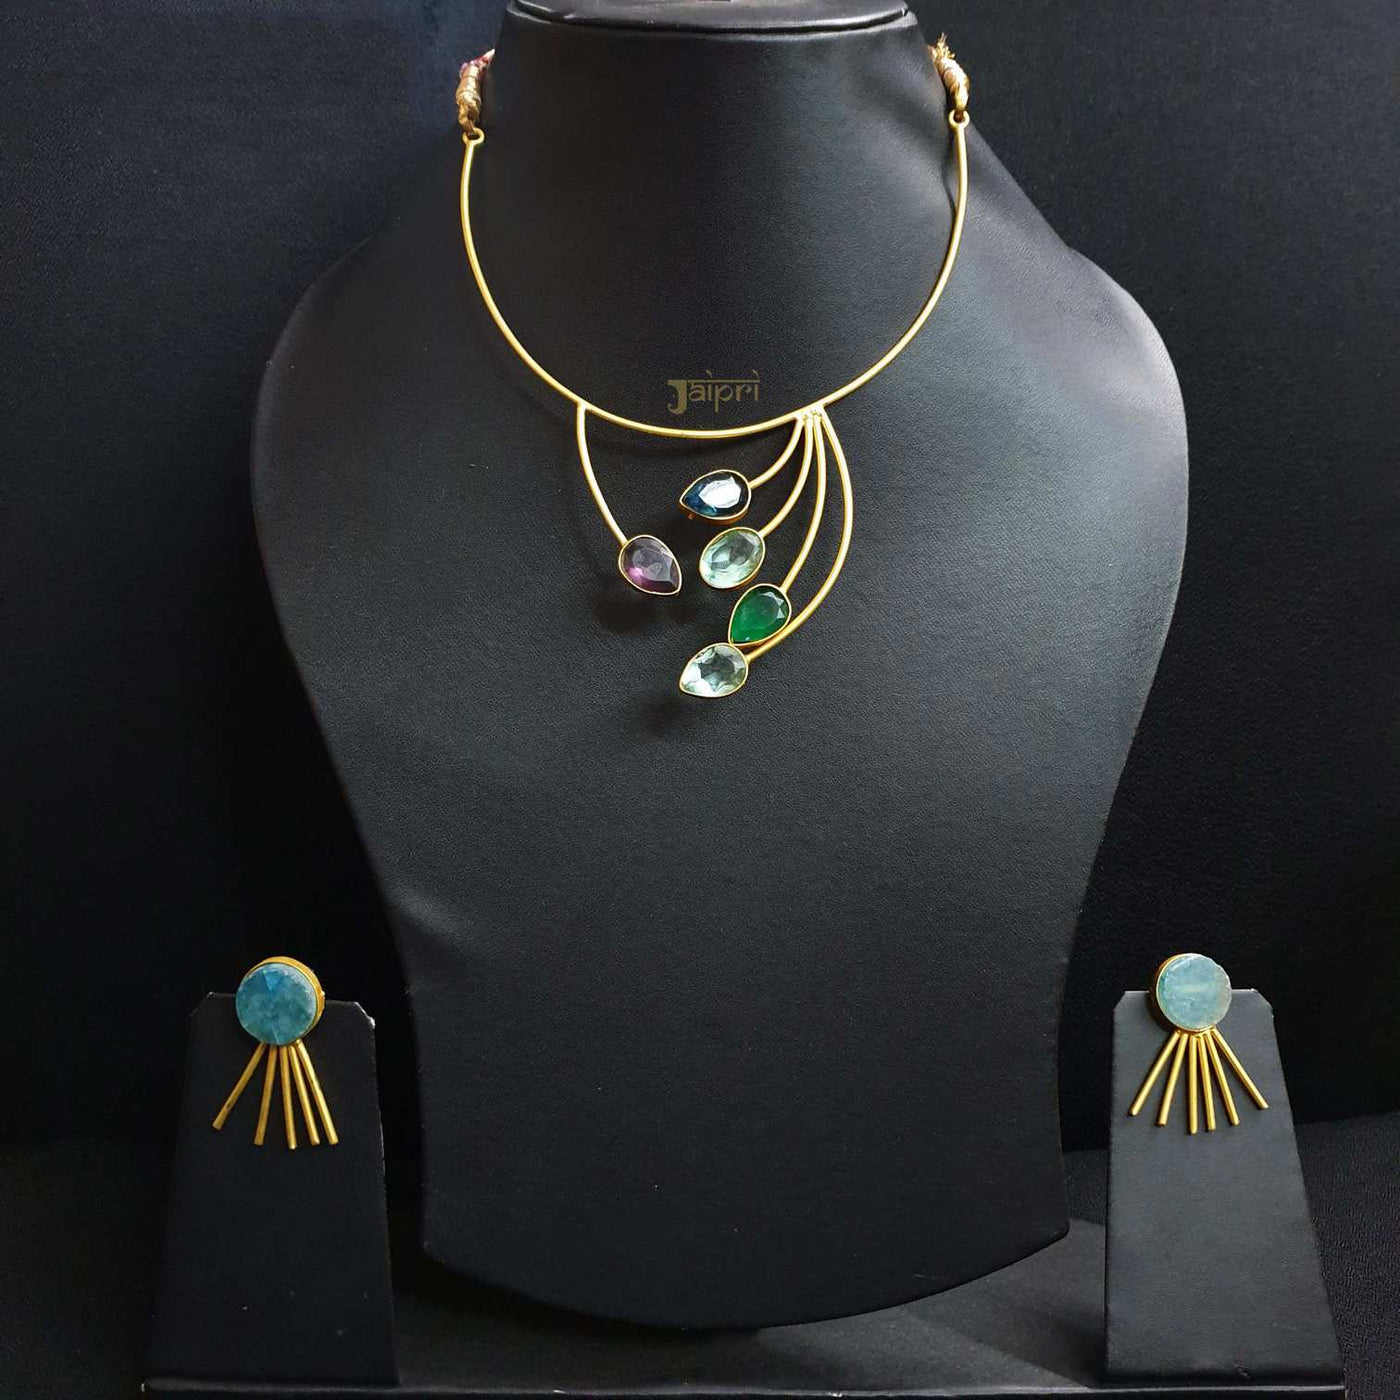 Adorable Multicolor Stone Gold Necklace With Earrings